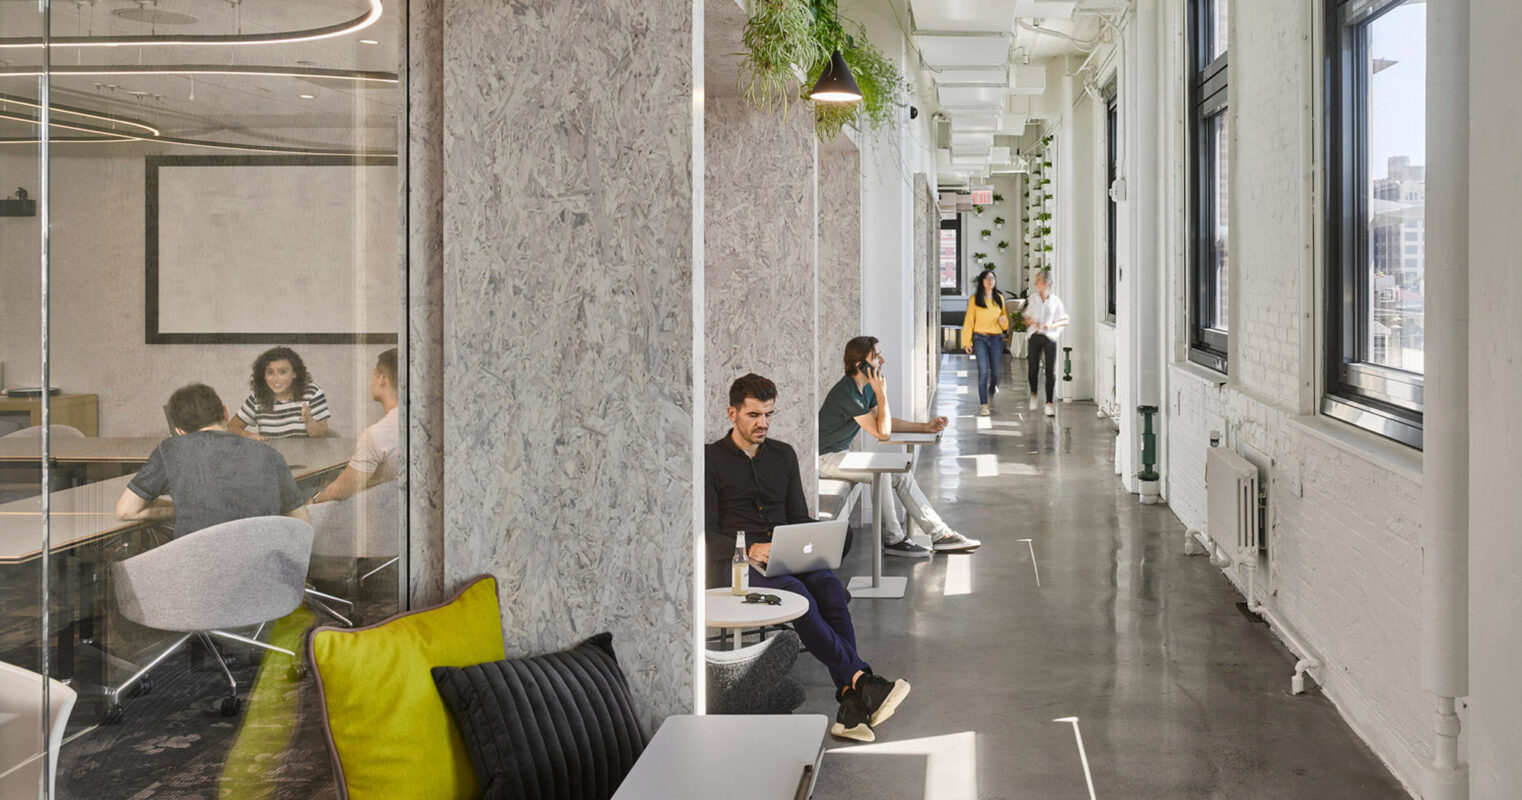 Modern office space blending natural light with greenery. Features a minimalist desk setup against marble walls, with employees working in communal zones that foster collaboration. Transparent partitions enhance openness, while plants add a biophilic touch to the sleek, contemporary environment.